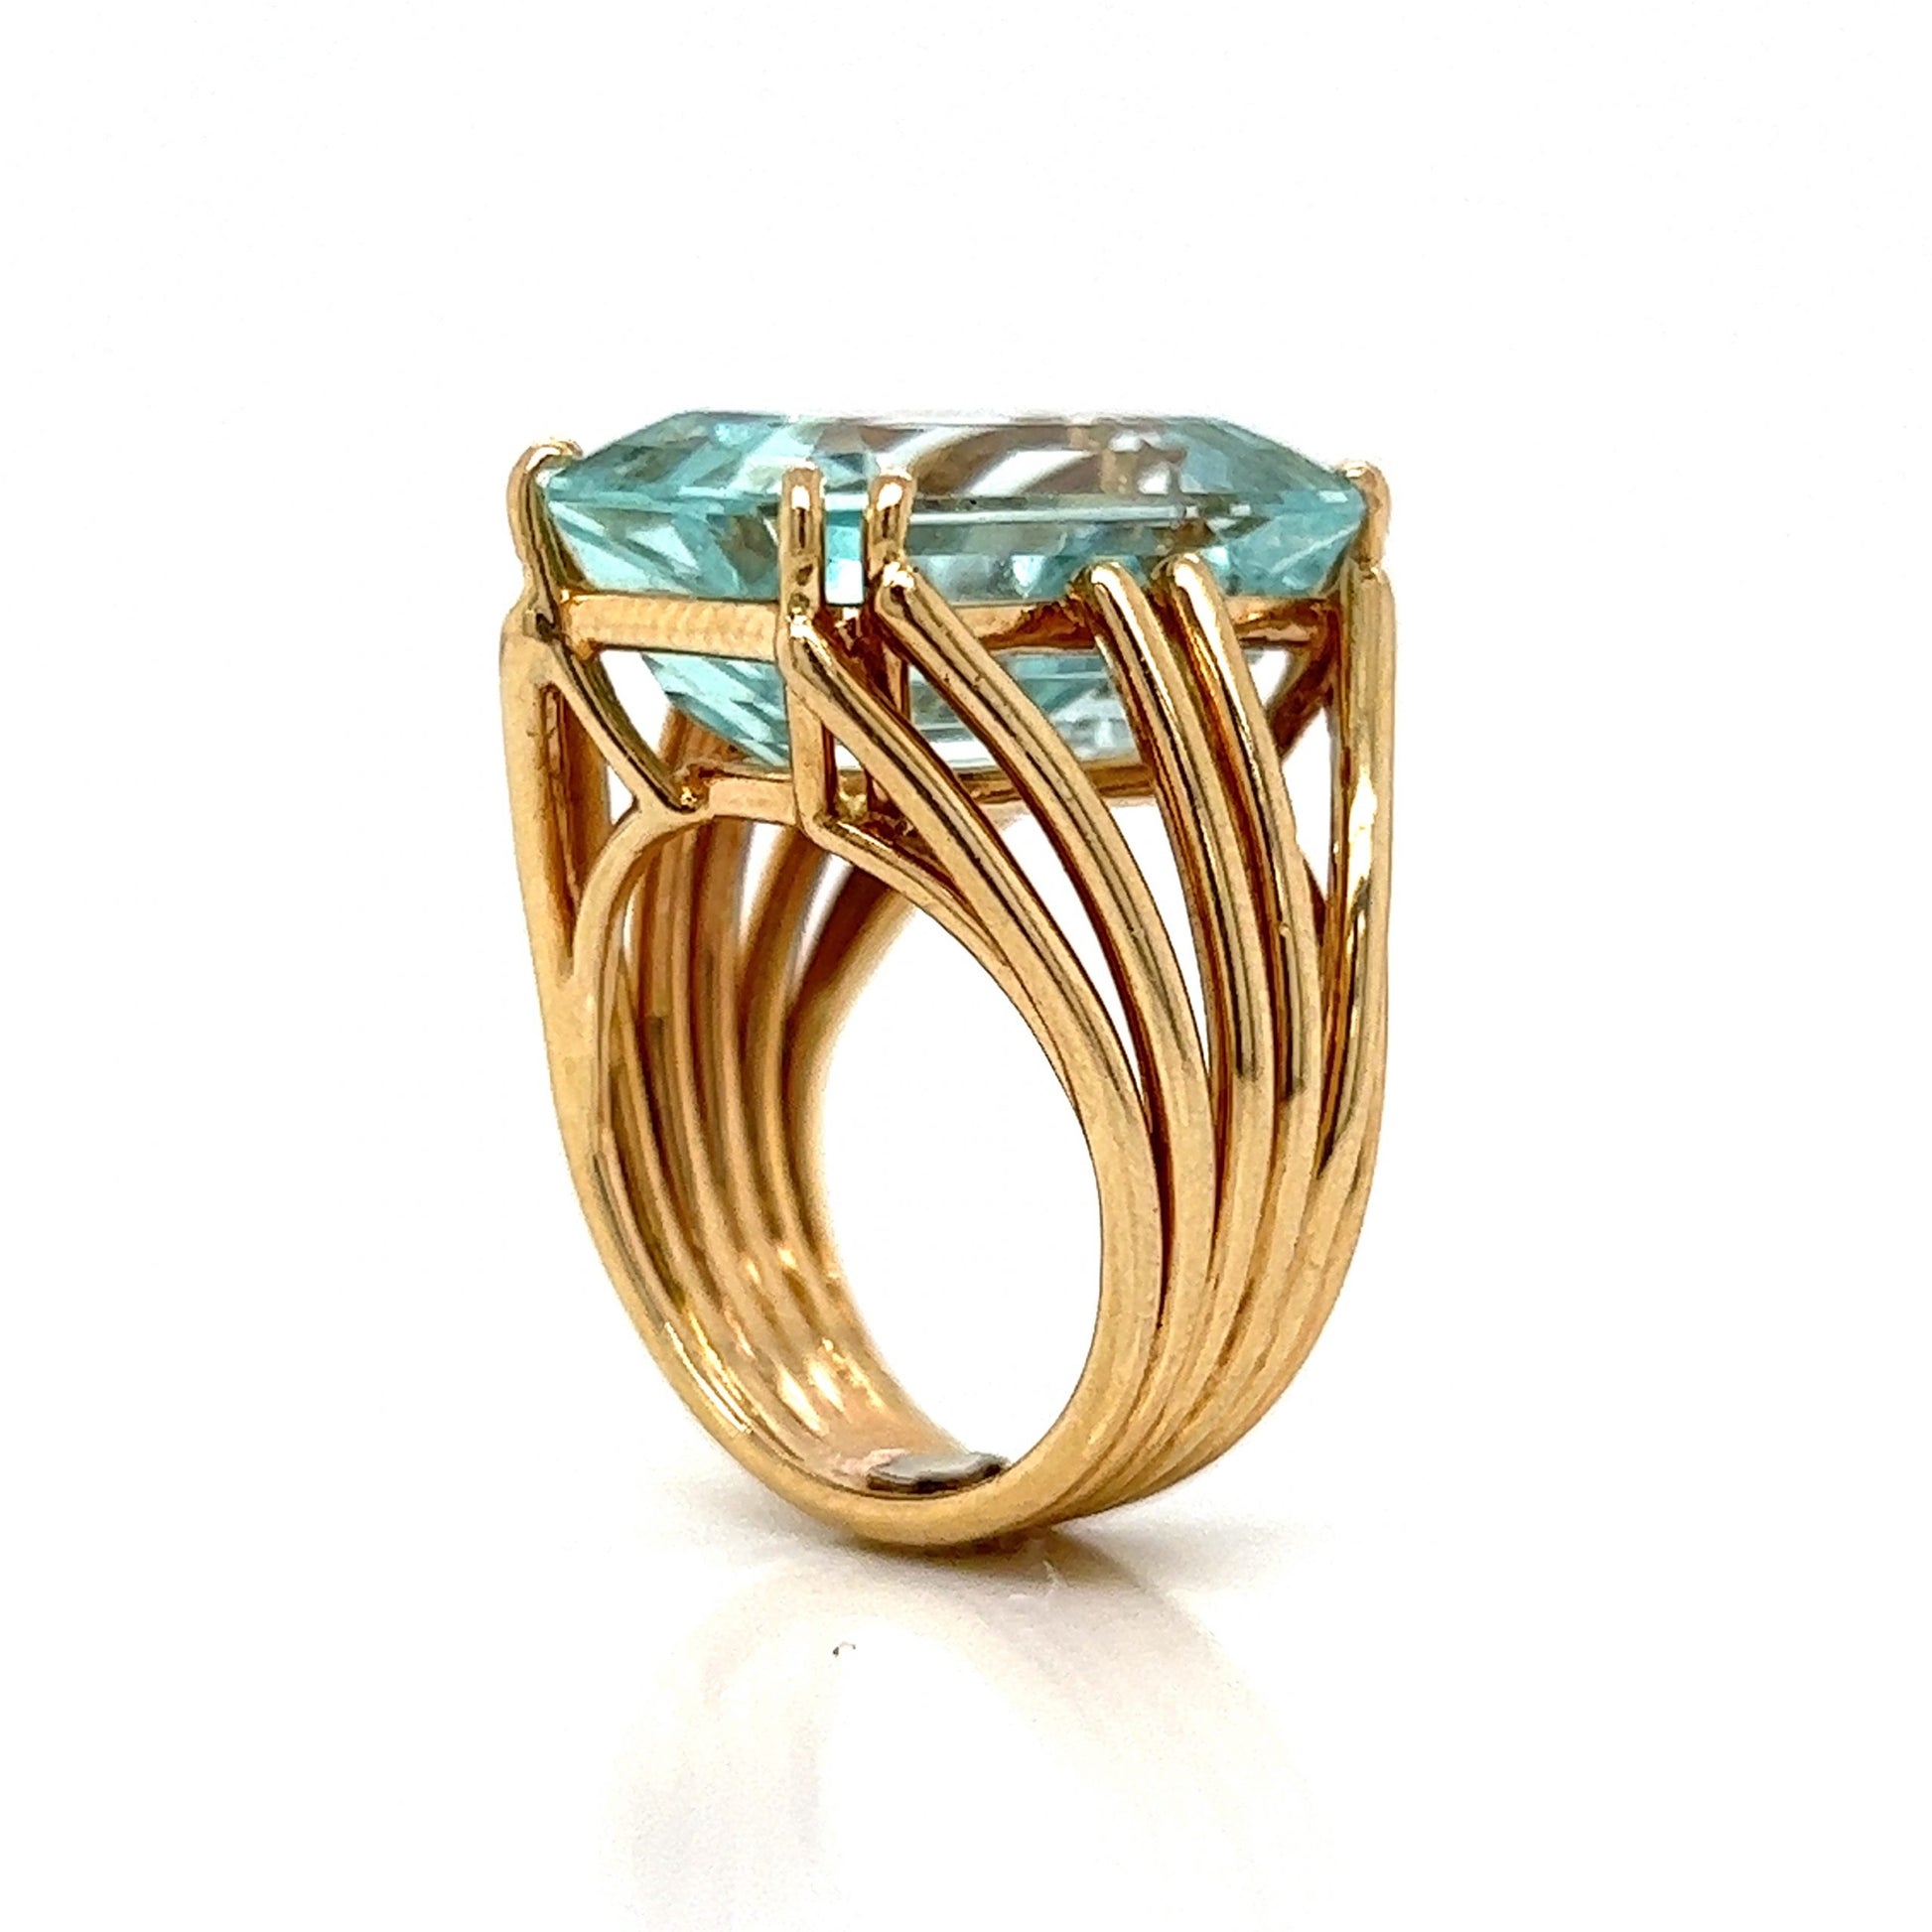 Mid-Century Aquamarine Cocktail Ring in 14k Yellow GoldComposition: 14 Karat Yellow GoldRing Size: 5Total Gram Weight: 12.0 gInscription: 14K